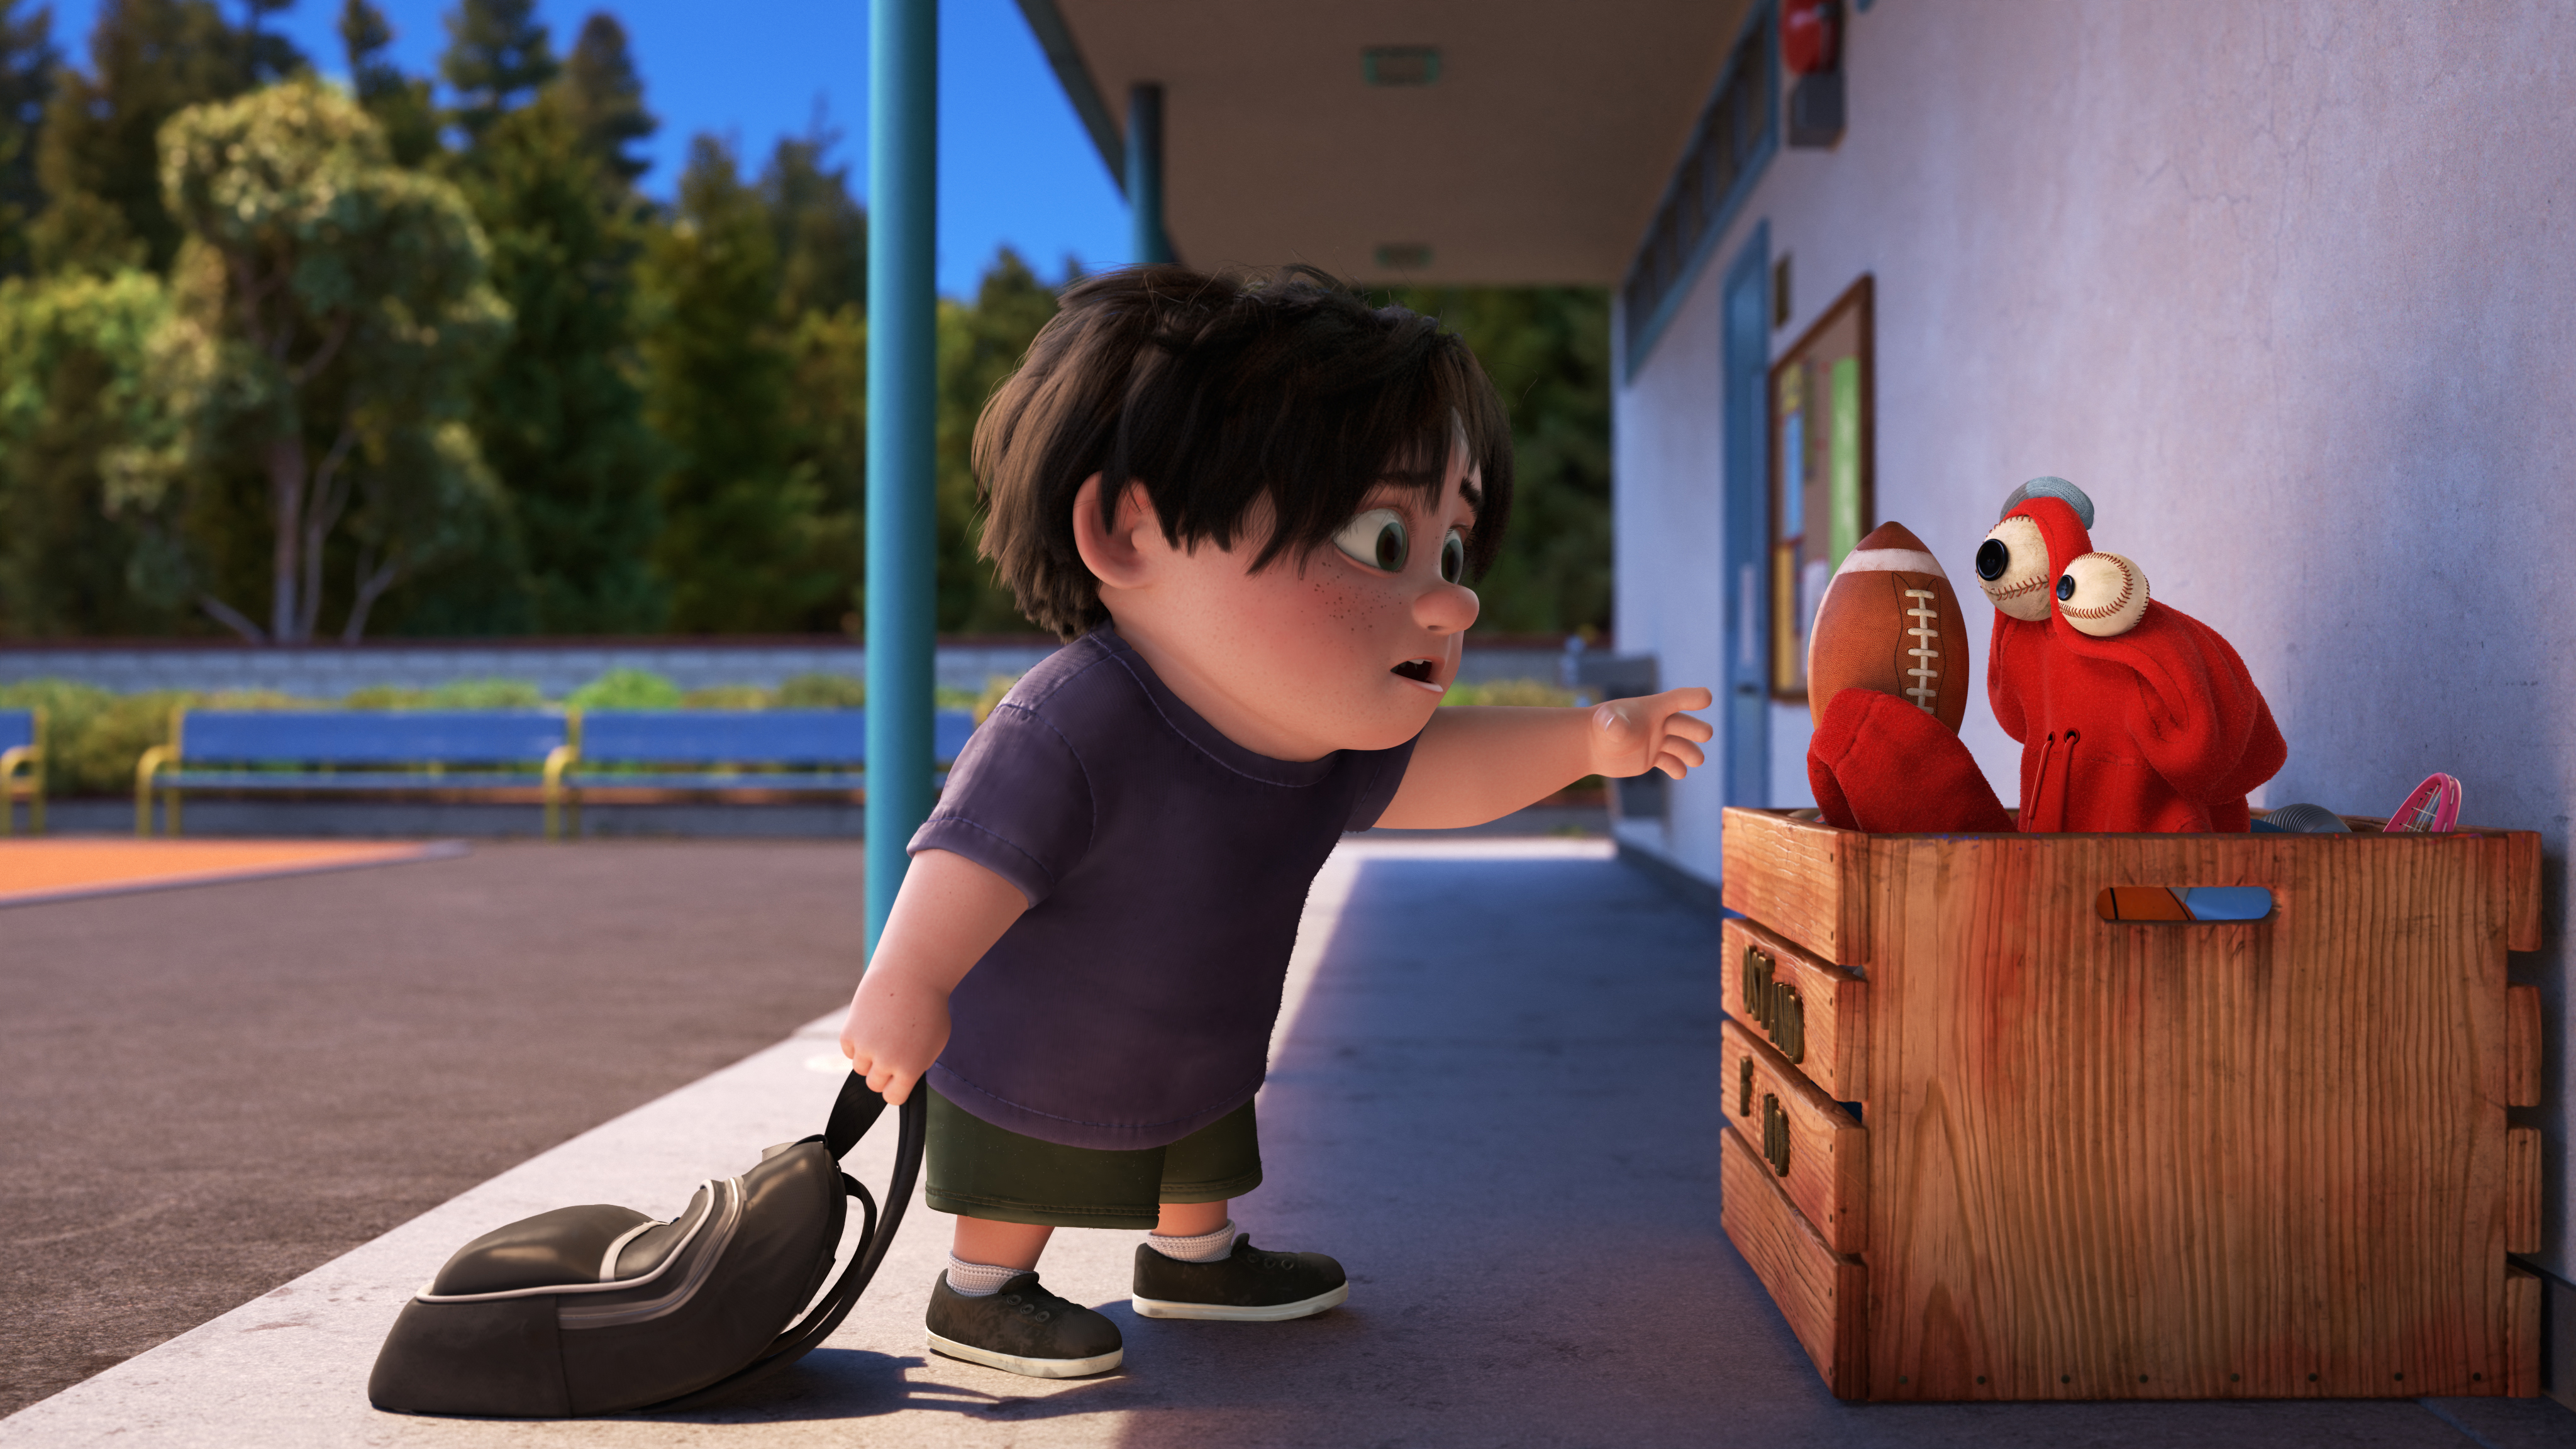 The Pixar Short Film Lou Is An Impressive And Touching Achievement In